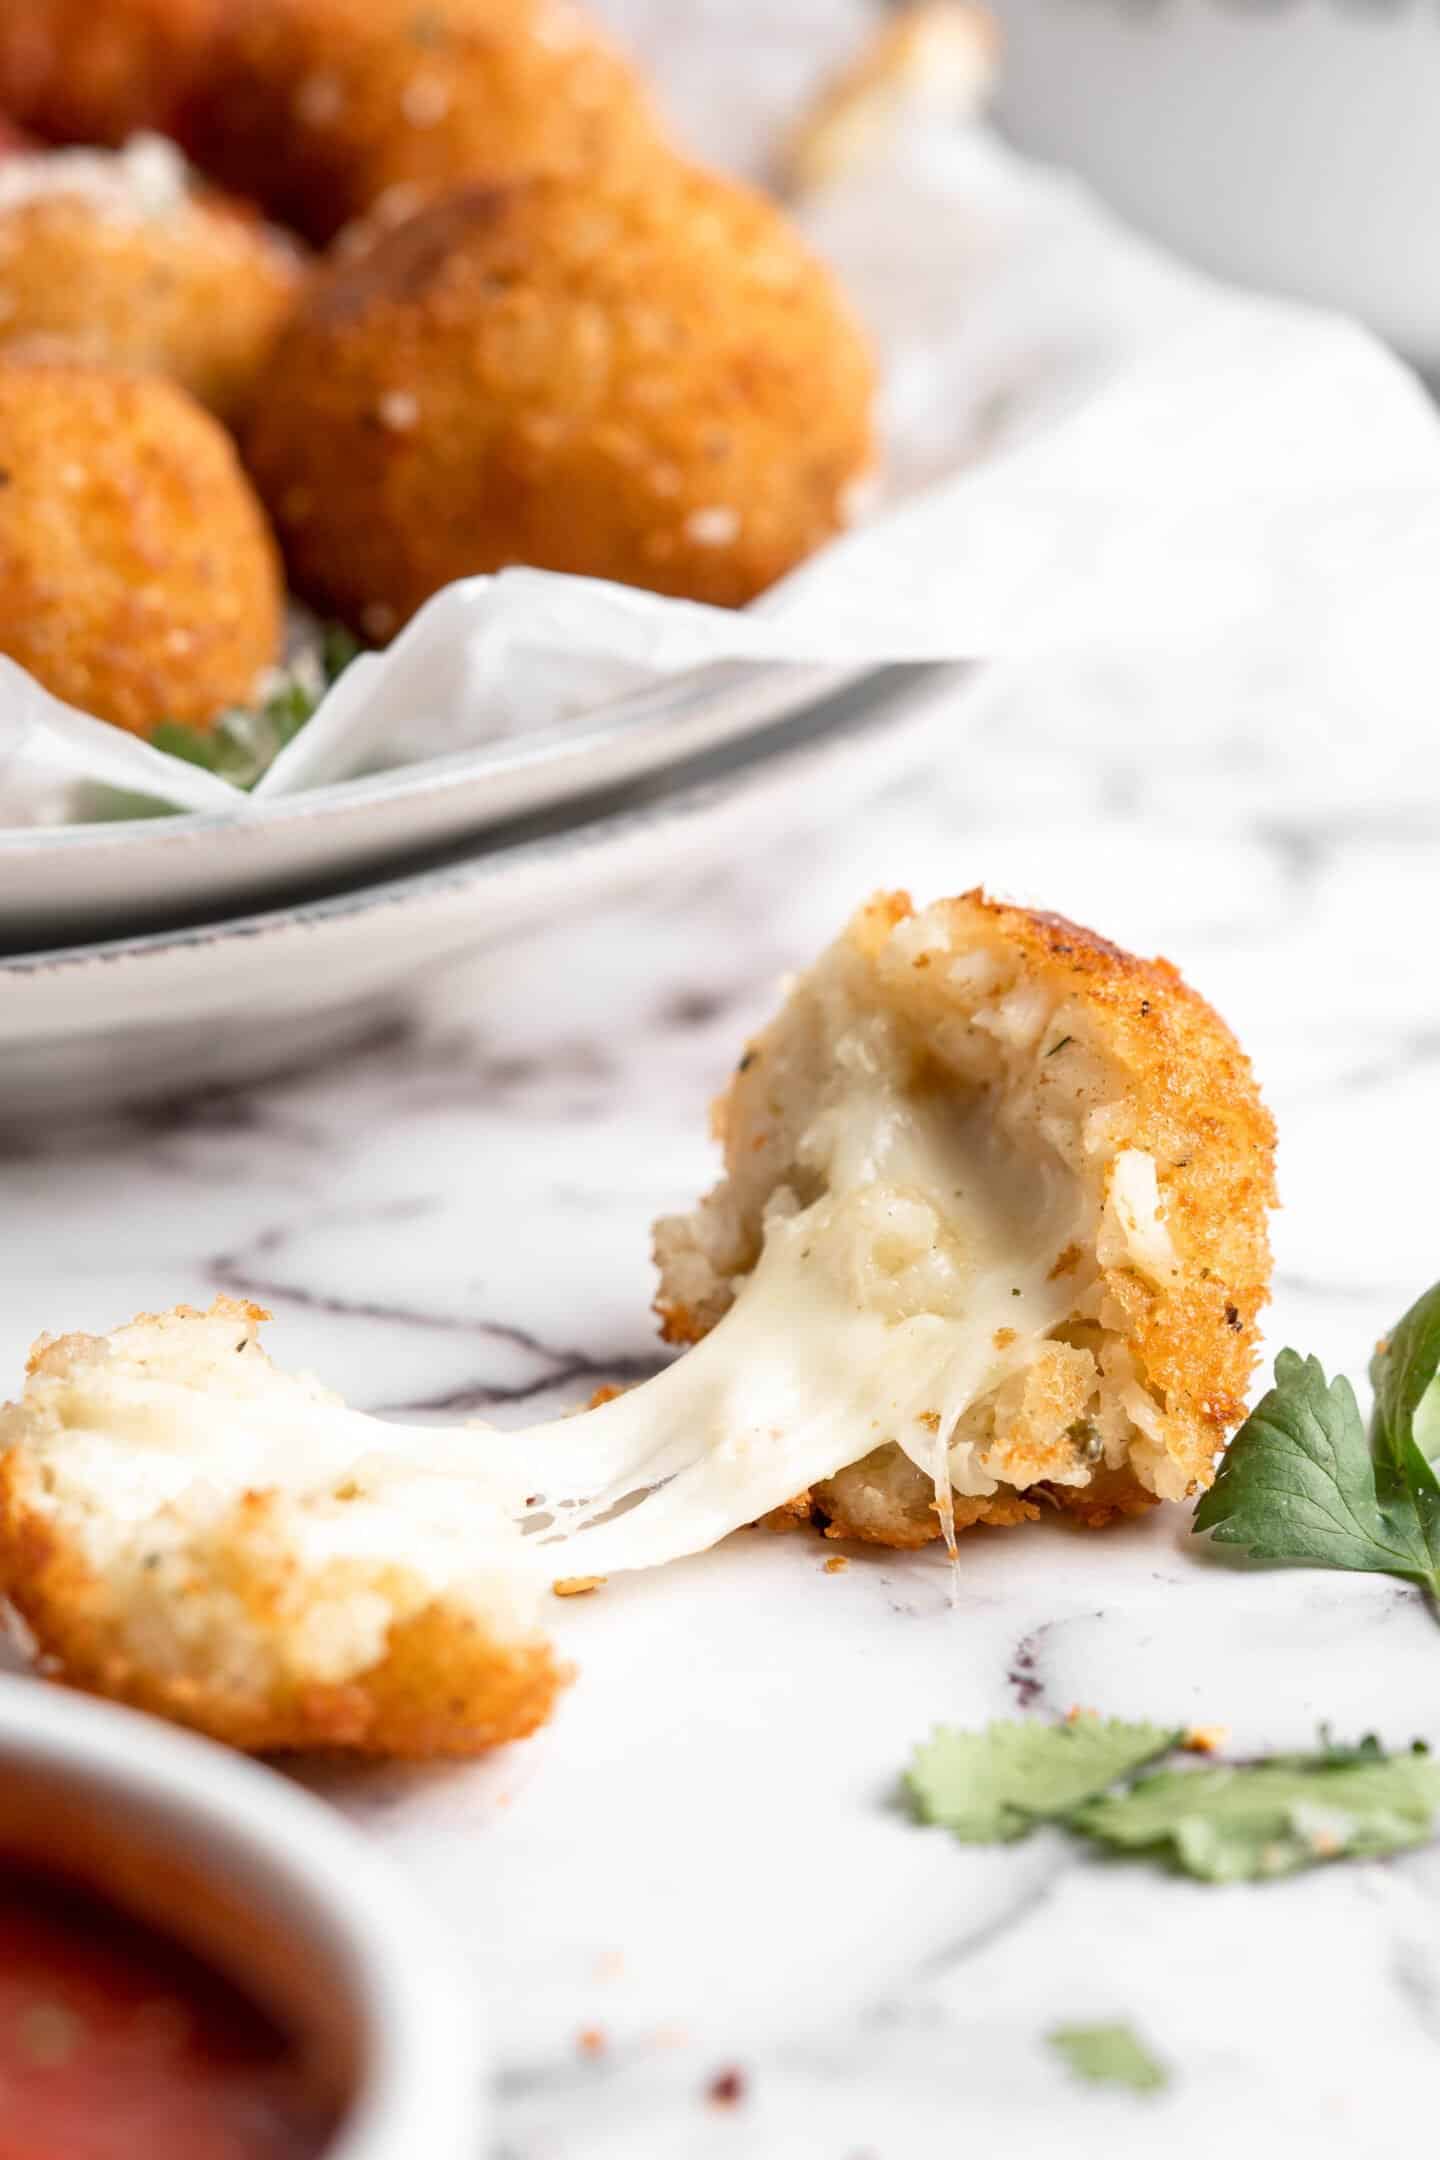 Two halves of an arancini, separated to show stretchy vegan cheese inside